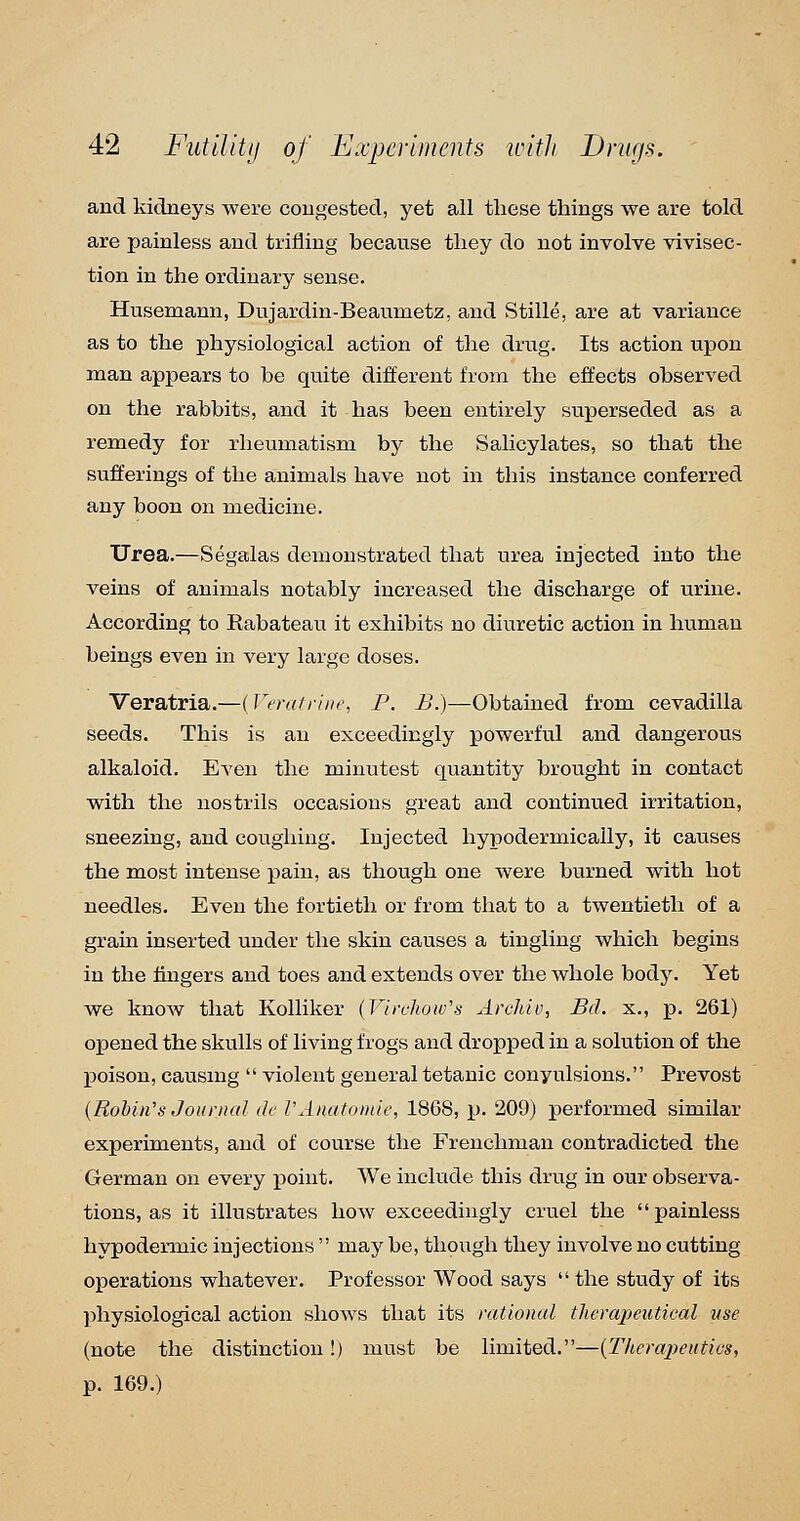 and kidneys were congested, yet all these things we are told are painless and trifling because they do not involve vivisec- tion in the ordinary sense. Husemann, Dujardin-Beaumetz, and Stille, are at variance as to the physiological action of the drug. Its action upon man appears to be quite different from the effects observed on the rabbits, and it has been entirely superseded as a remedy for rheumatism by the Salicylates, so that the sufferings of the animals have not in this instance conferred any boon on medicine. Urea.—Segalas demonstrated that urea injected into the veins of animals notably increased the discharge of urine. According to Rabateau it exhibits no diuretic action in human beings even in very large doses. Veratria.—{Veralriiie, P. B.)—Obtained from cevadilla seeds. This is an exceedingly powerful and dangerous alkaloid. Even the minutest quantity brought in contact with the nostrils occasions great and continued irritation, sneezing, and coughing. Injected hypodermically, it causes the most intense pain, as though one were burned with hot needles. Even the fortieth or from that to a twentieth of a grain inserted under the skin causes a tingling which begins in the fingers and toes and extends over the whole body. Yet we know that Kolliker {Virchow's ArcMv, Bd. x., p. 261) opened the skulls of living frogs and dropped in a solution of the poison, causing  violent general tetanic convulsions. Prevost {Rohin's Journal dc VAnatoinle, 1868, ]). 209) performed similar experiments, and of course the Frenchman contradicted the German on every jjoint. We include this drug in our observa- tions, as it illustrates how exceedingly cruel the painless hypodei-mic injections  may be, though they involve no cutting operations whatever. Professor Wood says  the study of its ])hysiological action shows that its rational therapeutical use (note the distinction!) must be limited.—{Therapeutics, p. 169.)